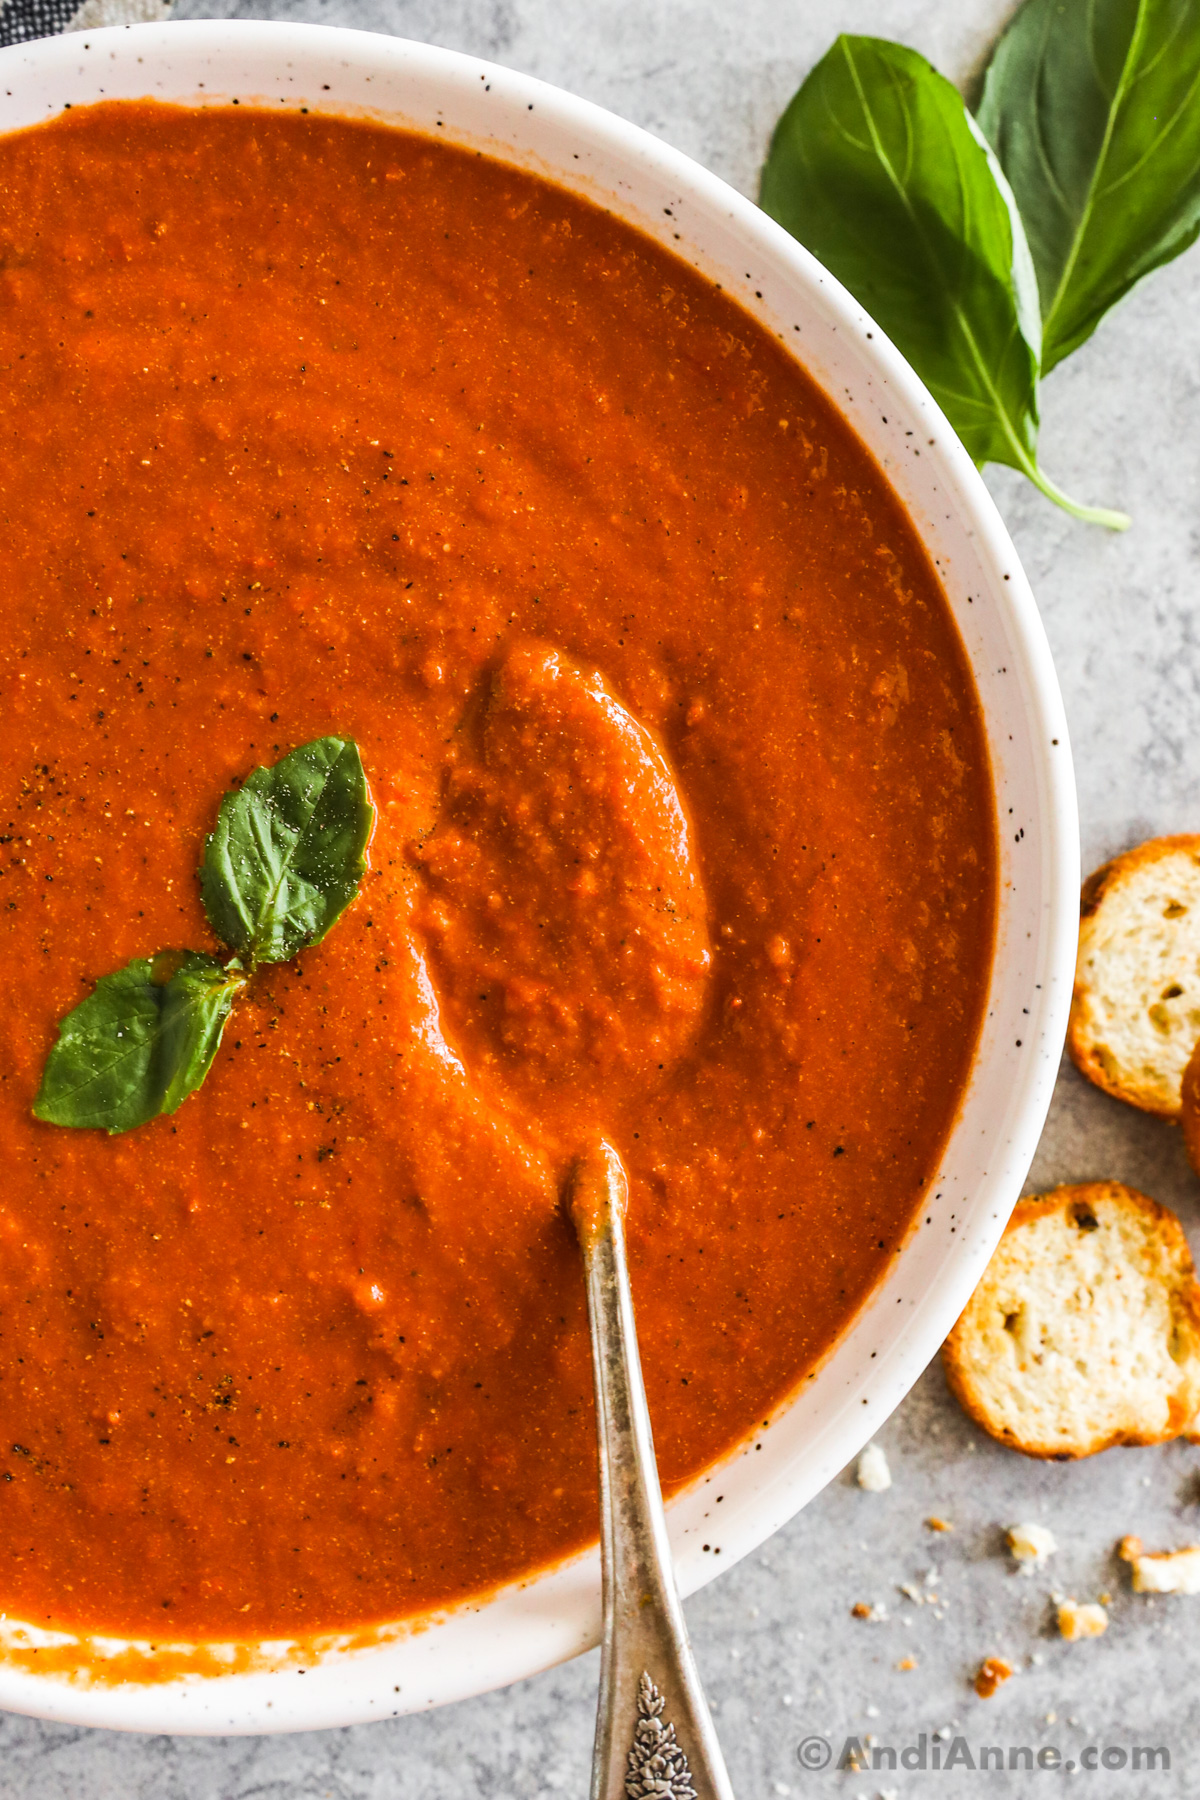 A white bowl of tomato soup garnished with fresh basil leaves.